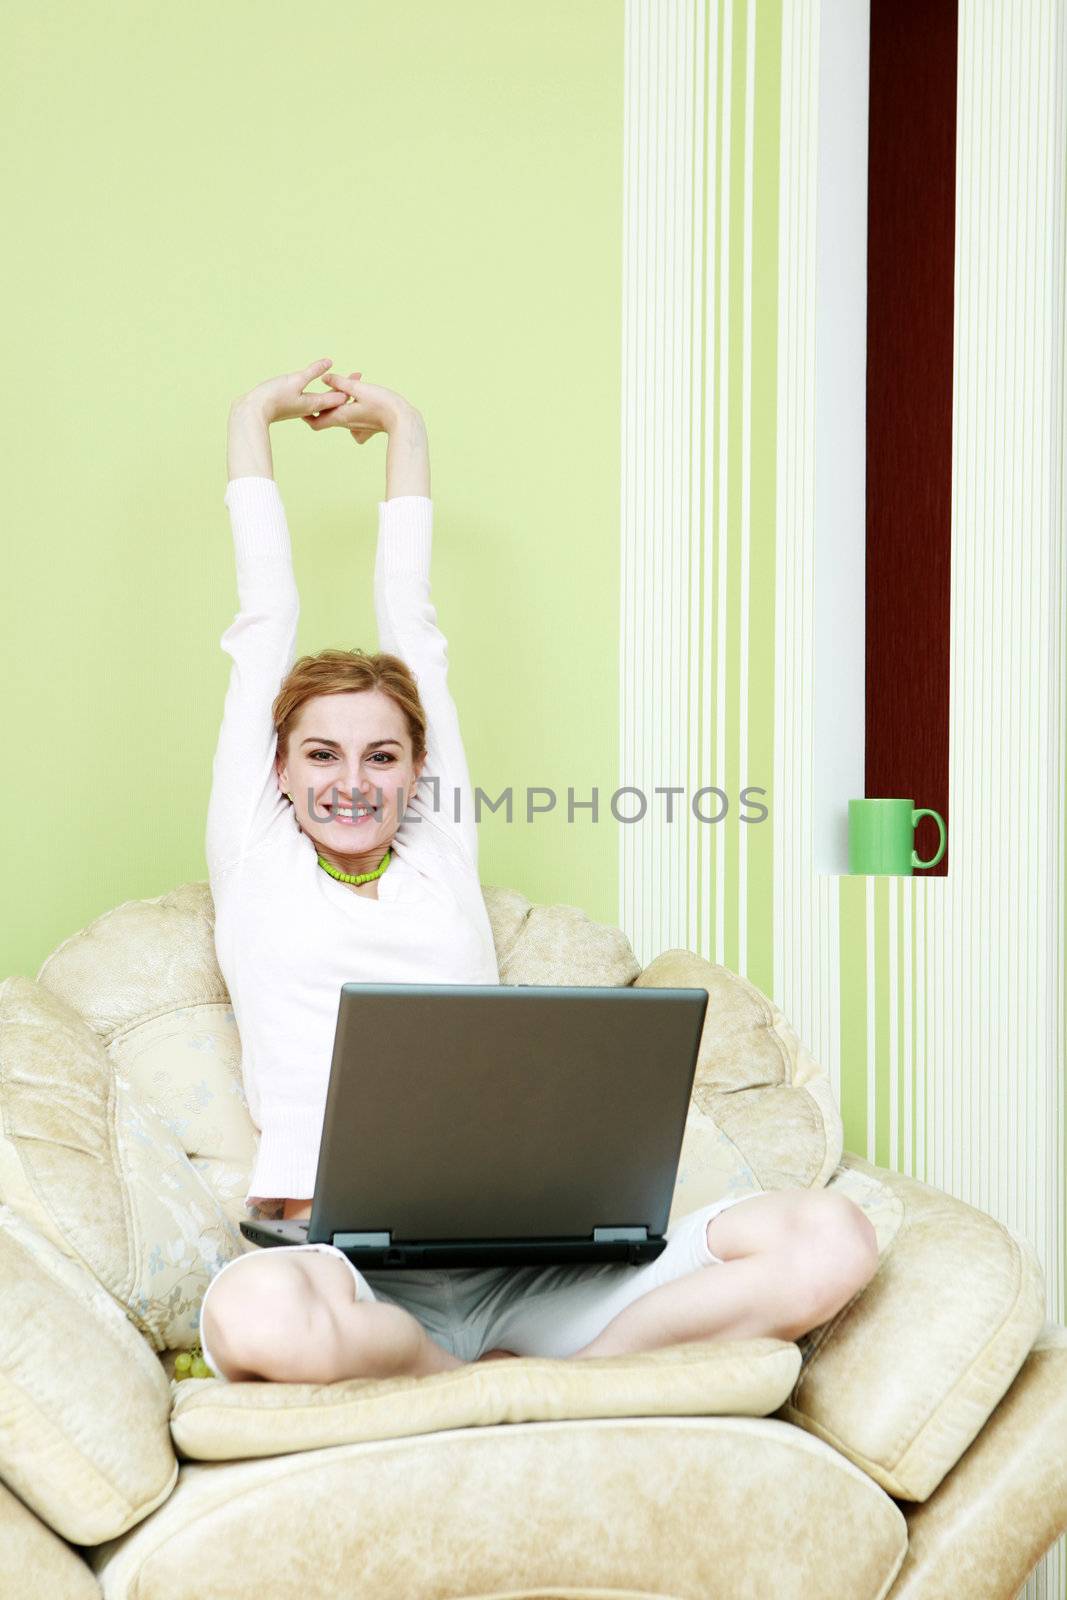 An image of a woman with laptop in armchair